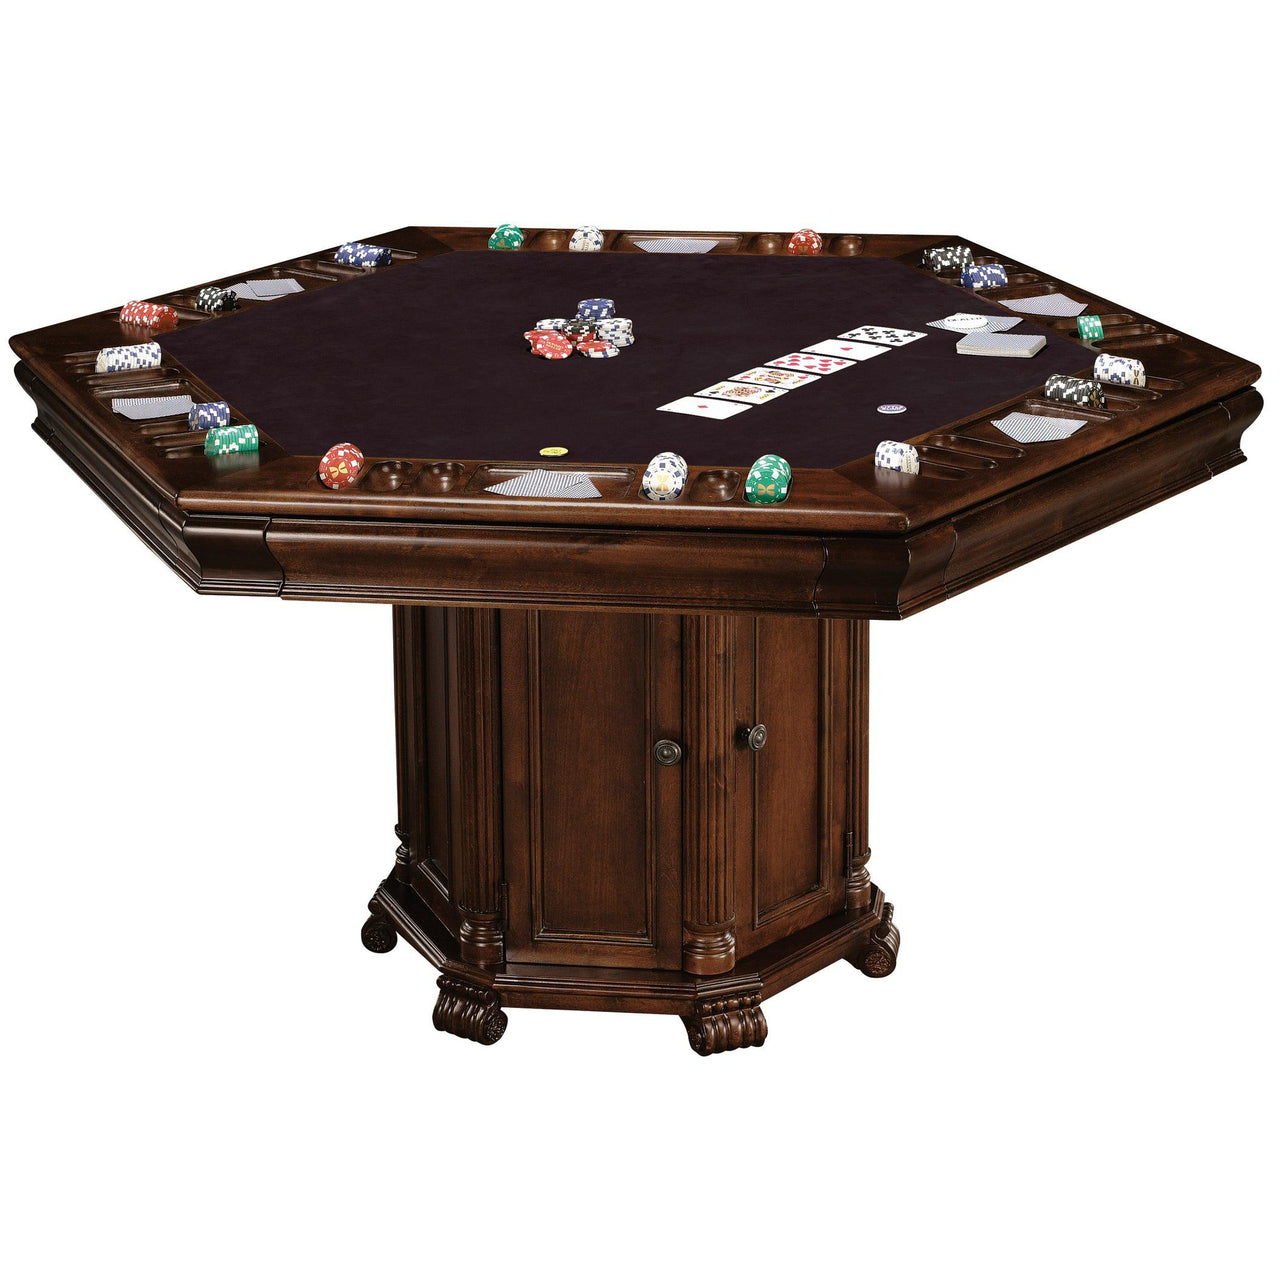 Howard Miller Poker and Dining Table set Niagara with matching chairs-AMERICANA-POKER-TABLES